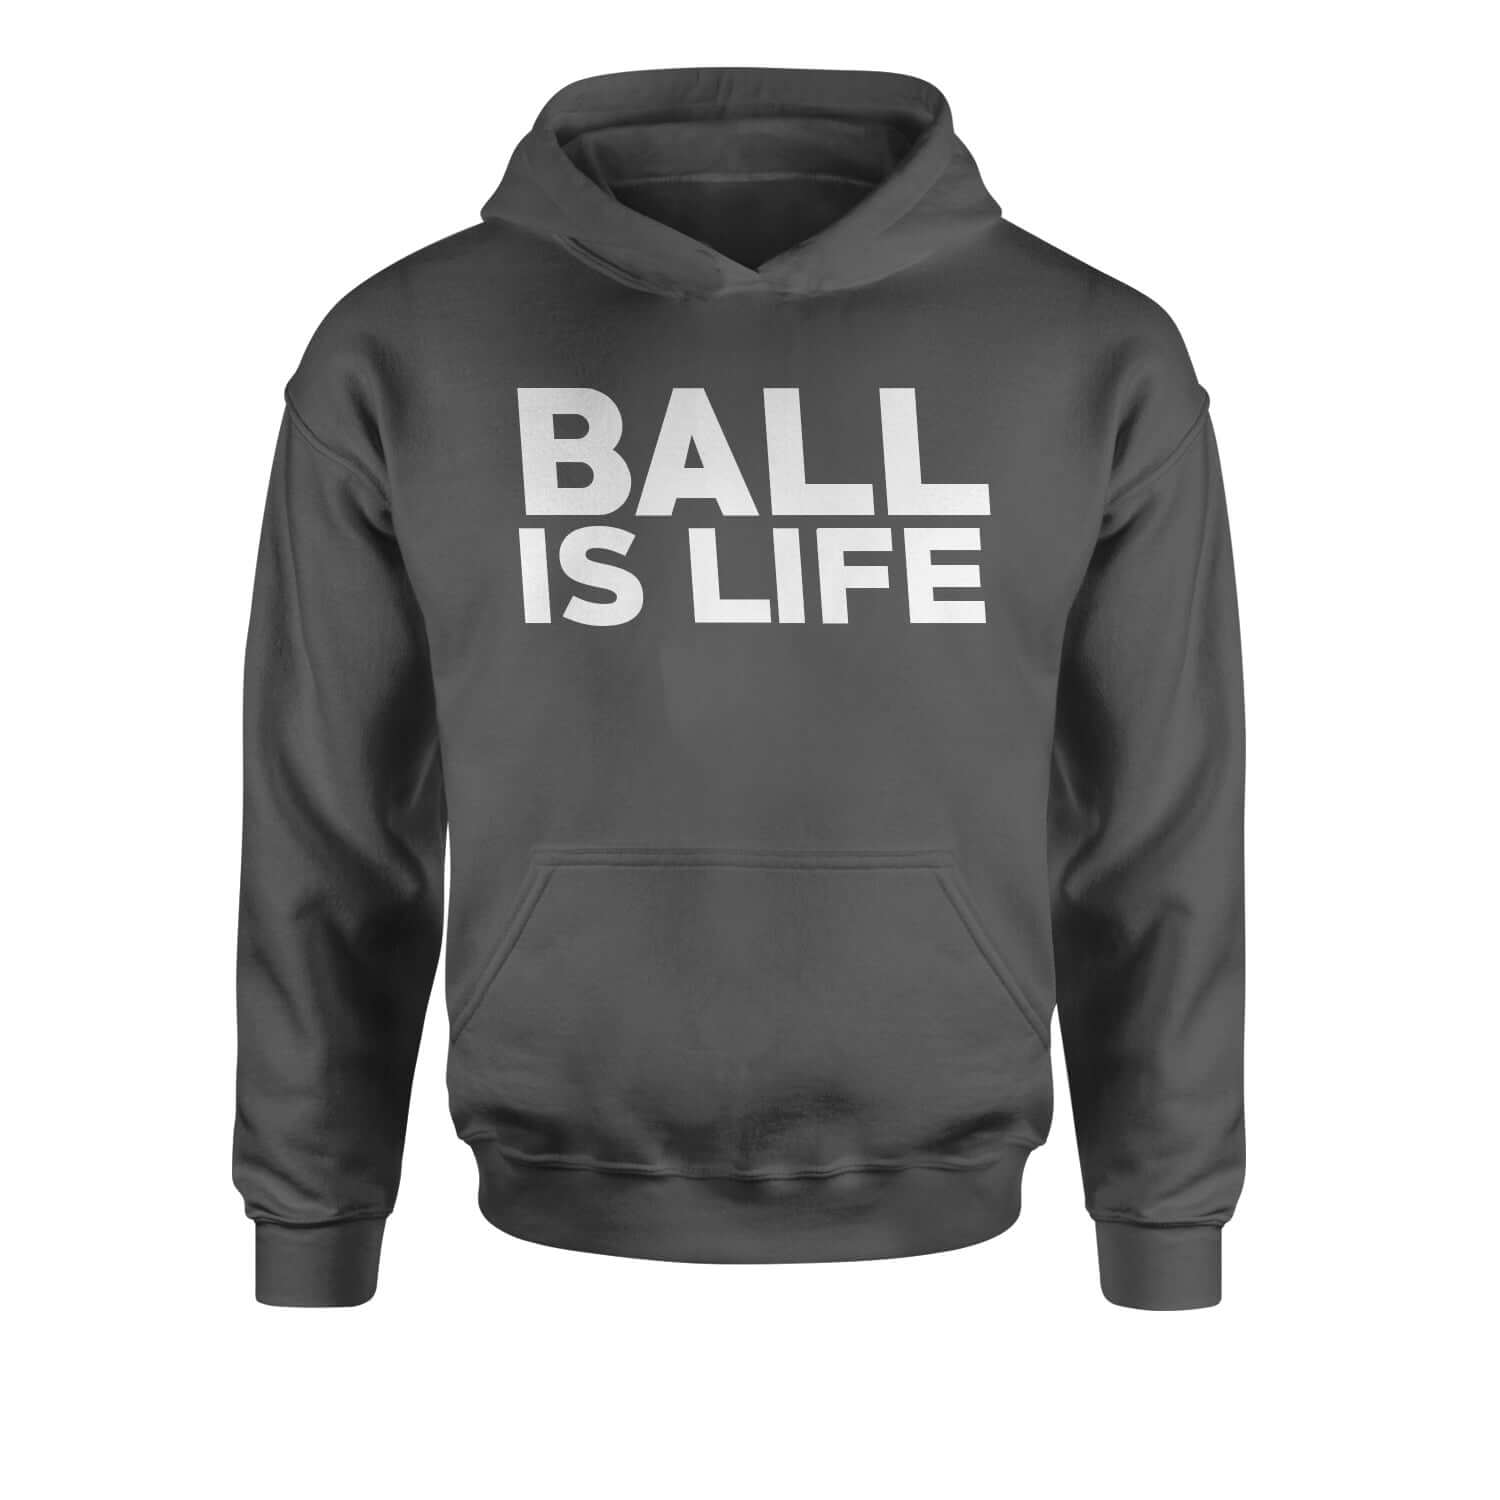 Ball Is Life Youth-Sized Hoodie baseball, basketball, football by Expression Tees